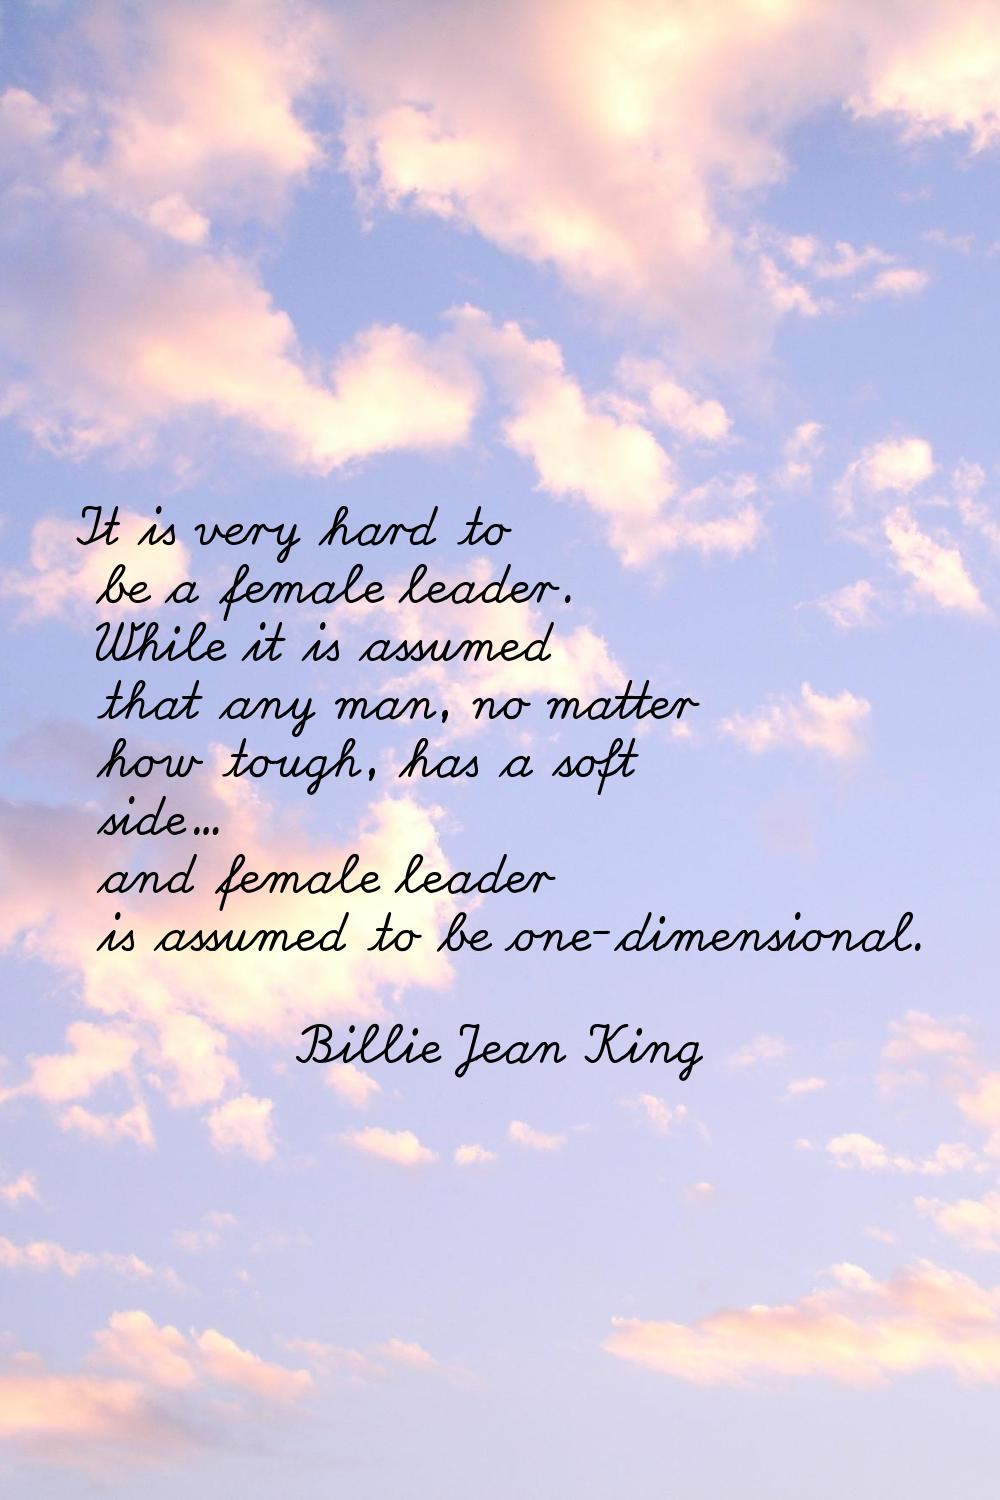 It is very hard to be a female leader. While it is assumed that any man, no matter how tough, has a